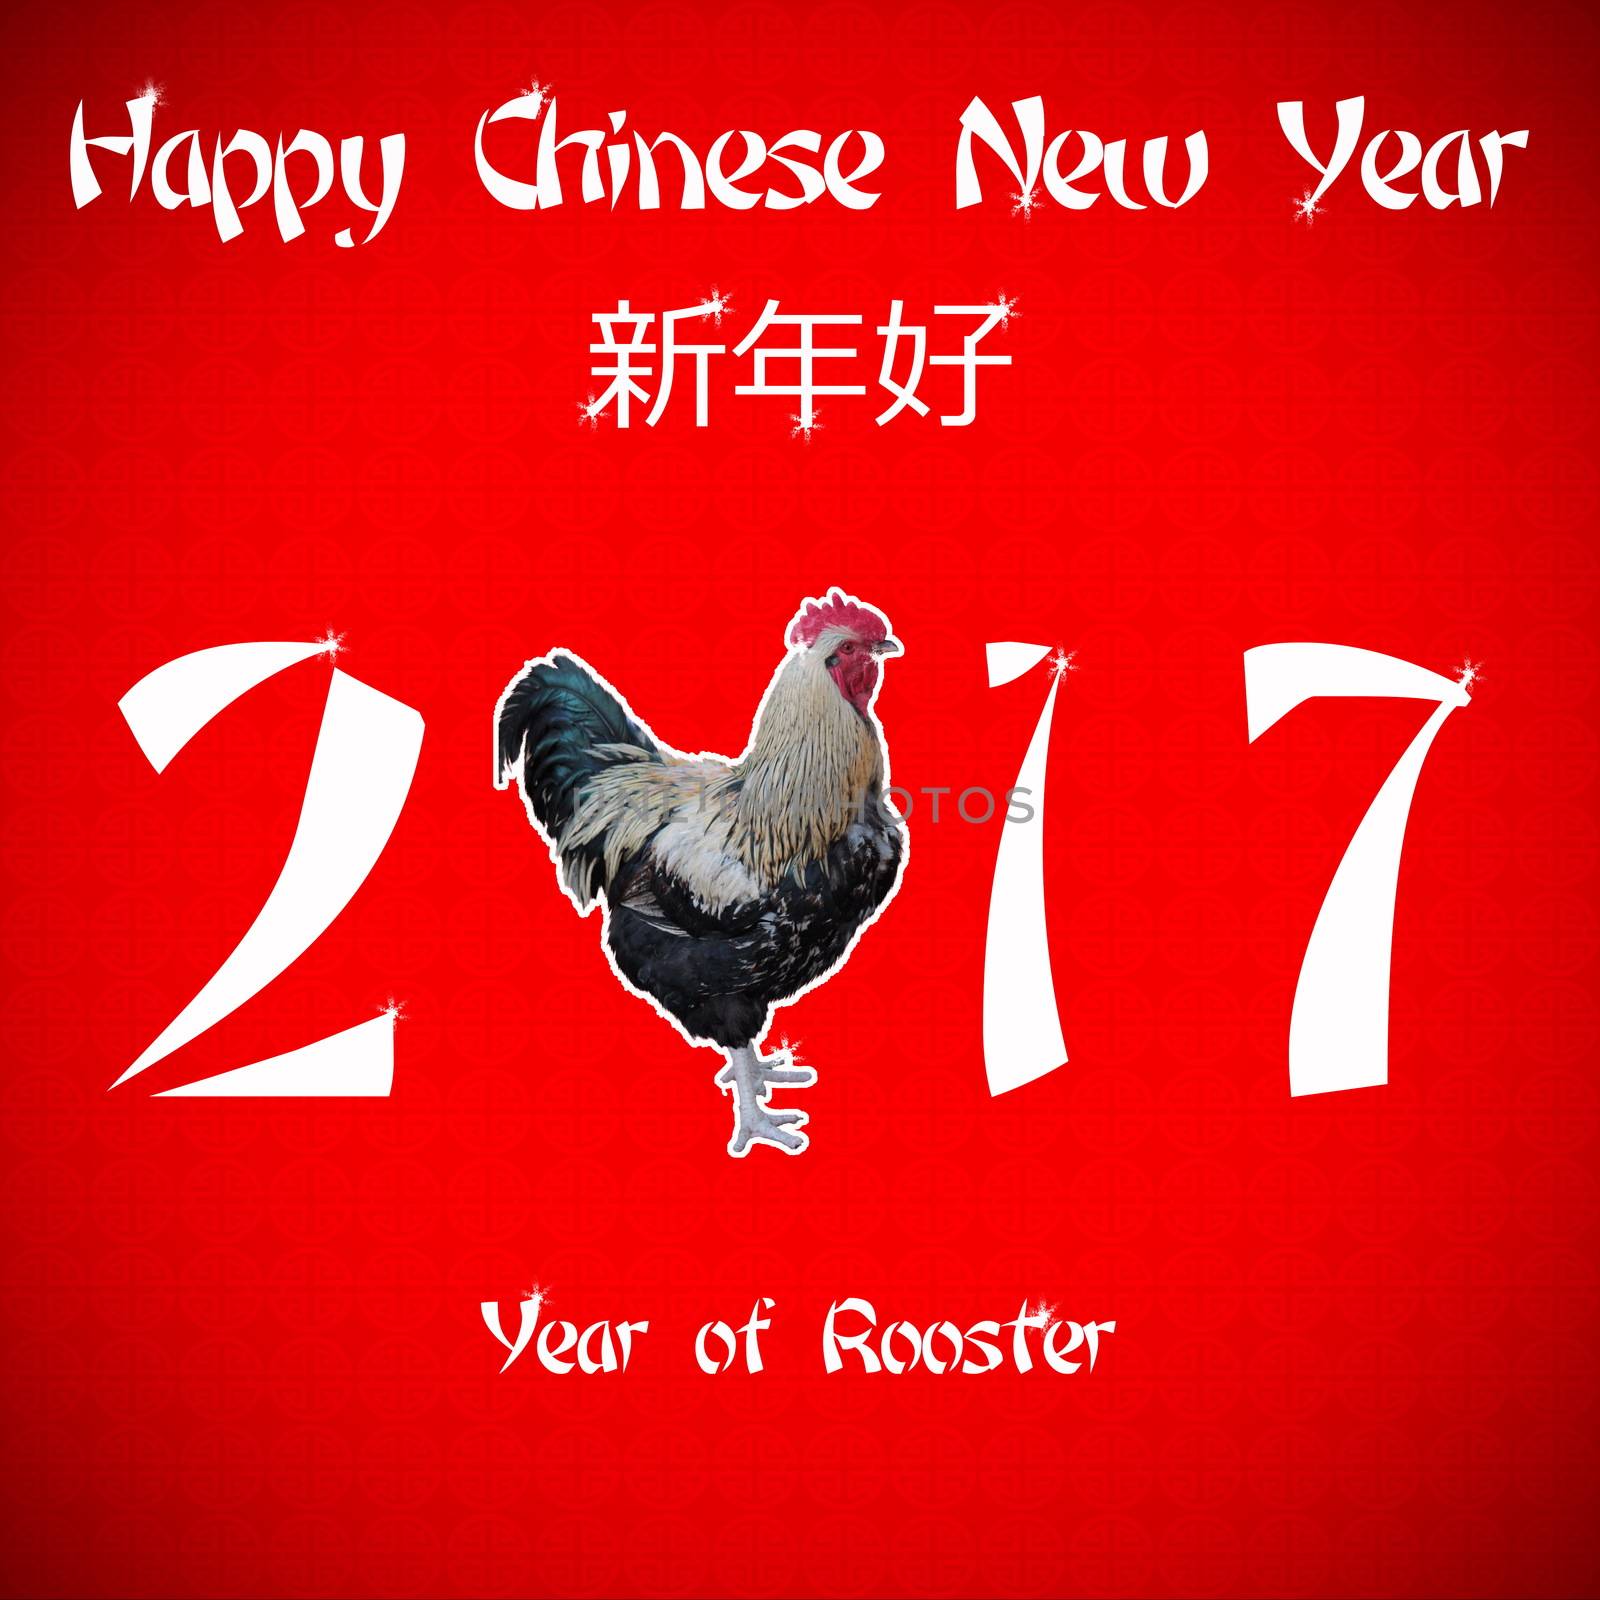 Rooster for the new chinese 2017 year in red background